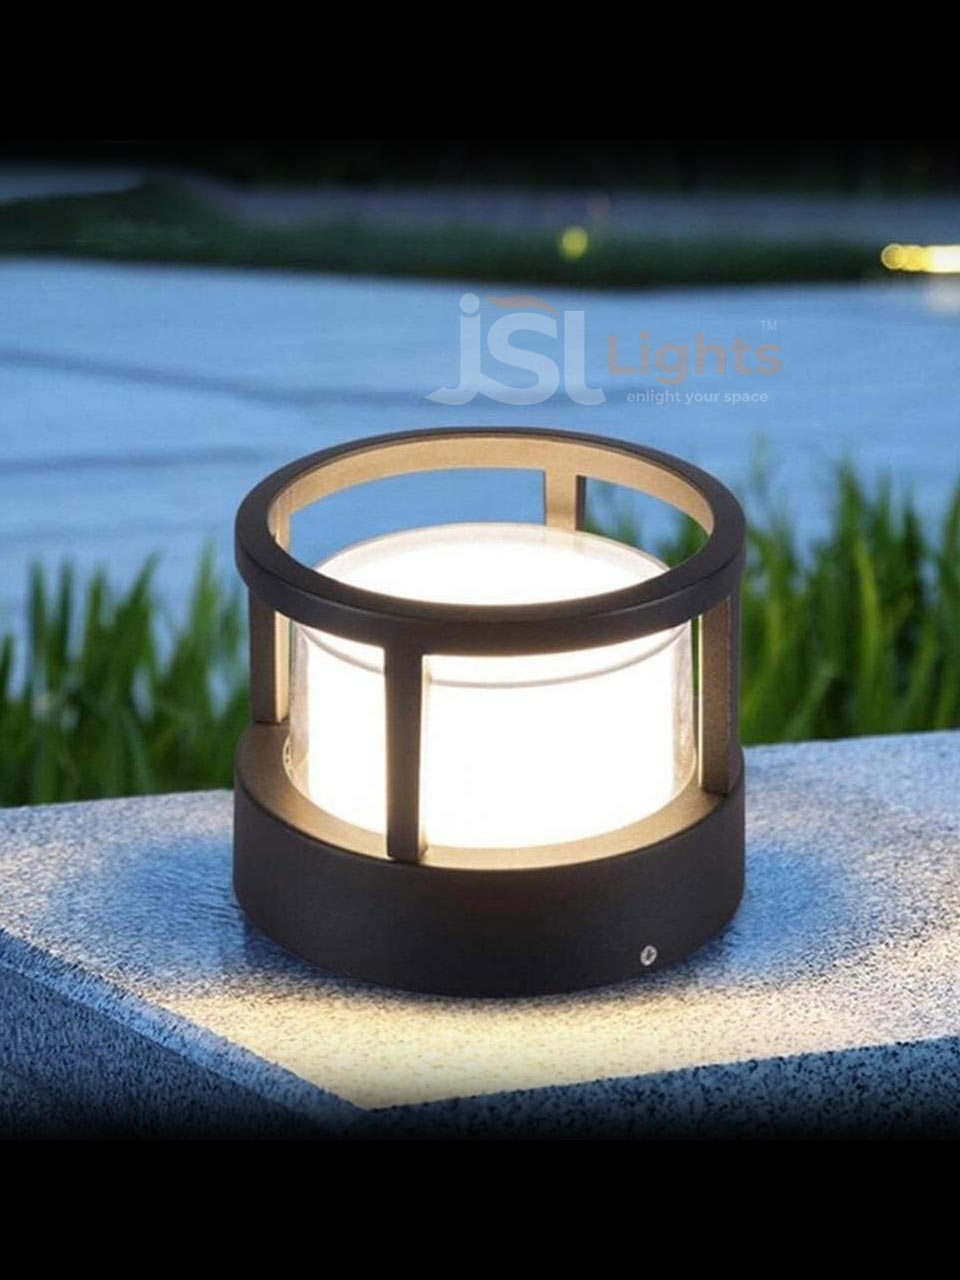 819 Small Round LED Gate Light for Outdoor Pillar 7 Inches Post Top Lamp with 5W Inbuilt LED Light Aluminium Body IP65